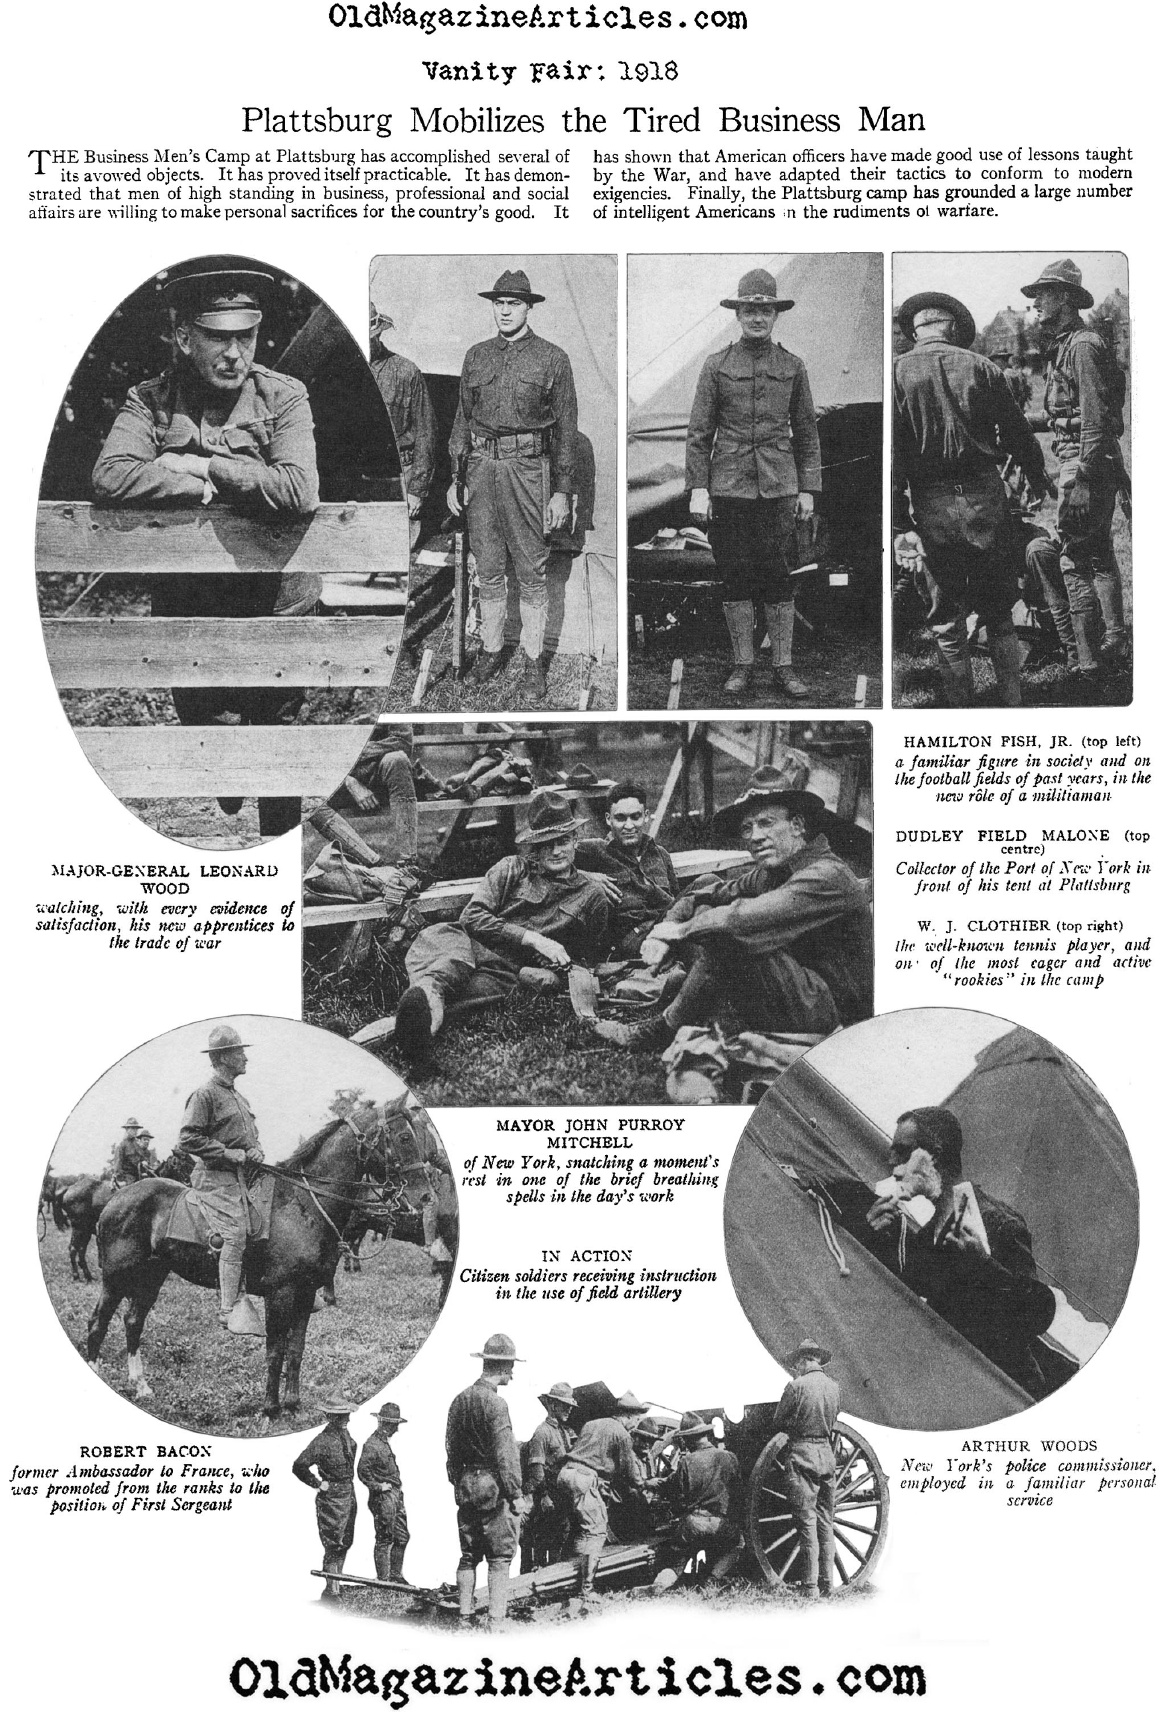 The Training of American Blue Blooded Officers at Plattsburg (Vanity Fair Magazine, 1917)